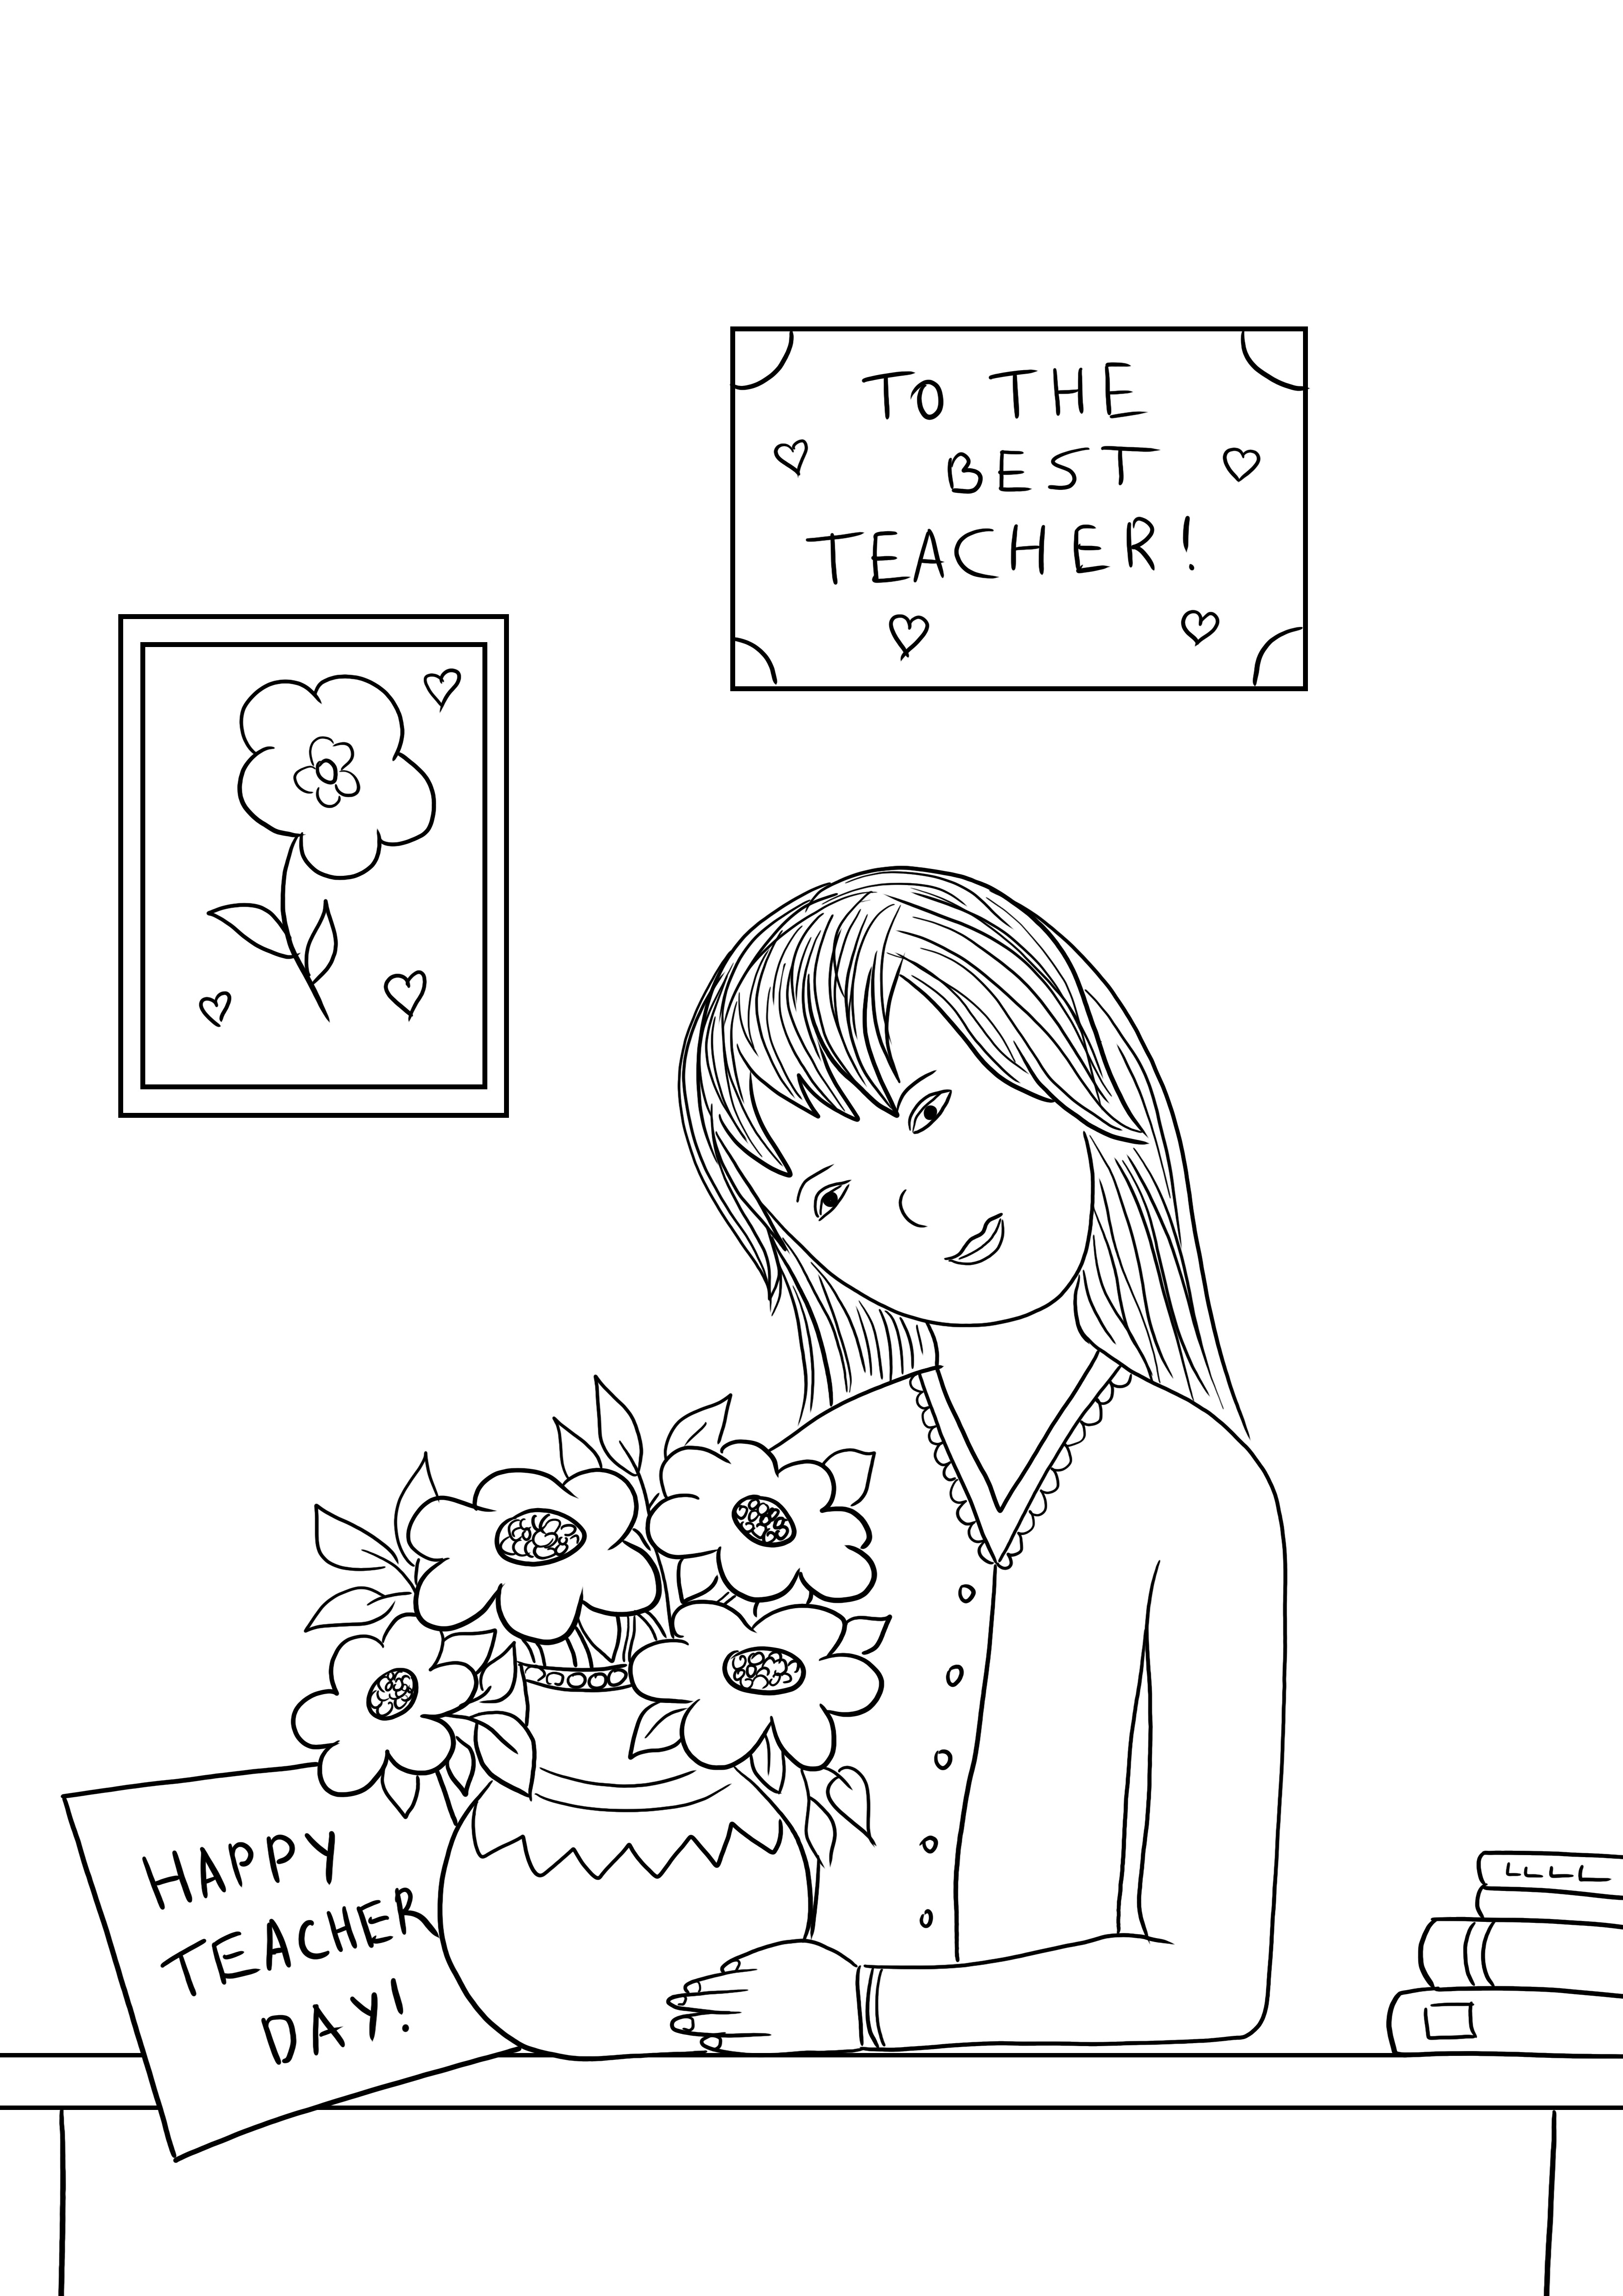 our-coloring-page-of-the-happy-teacher-s-day-card-is-ready-to-be